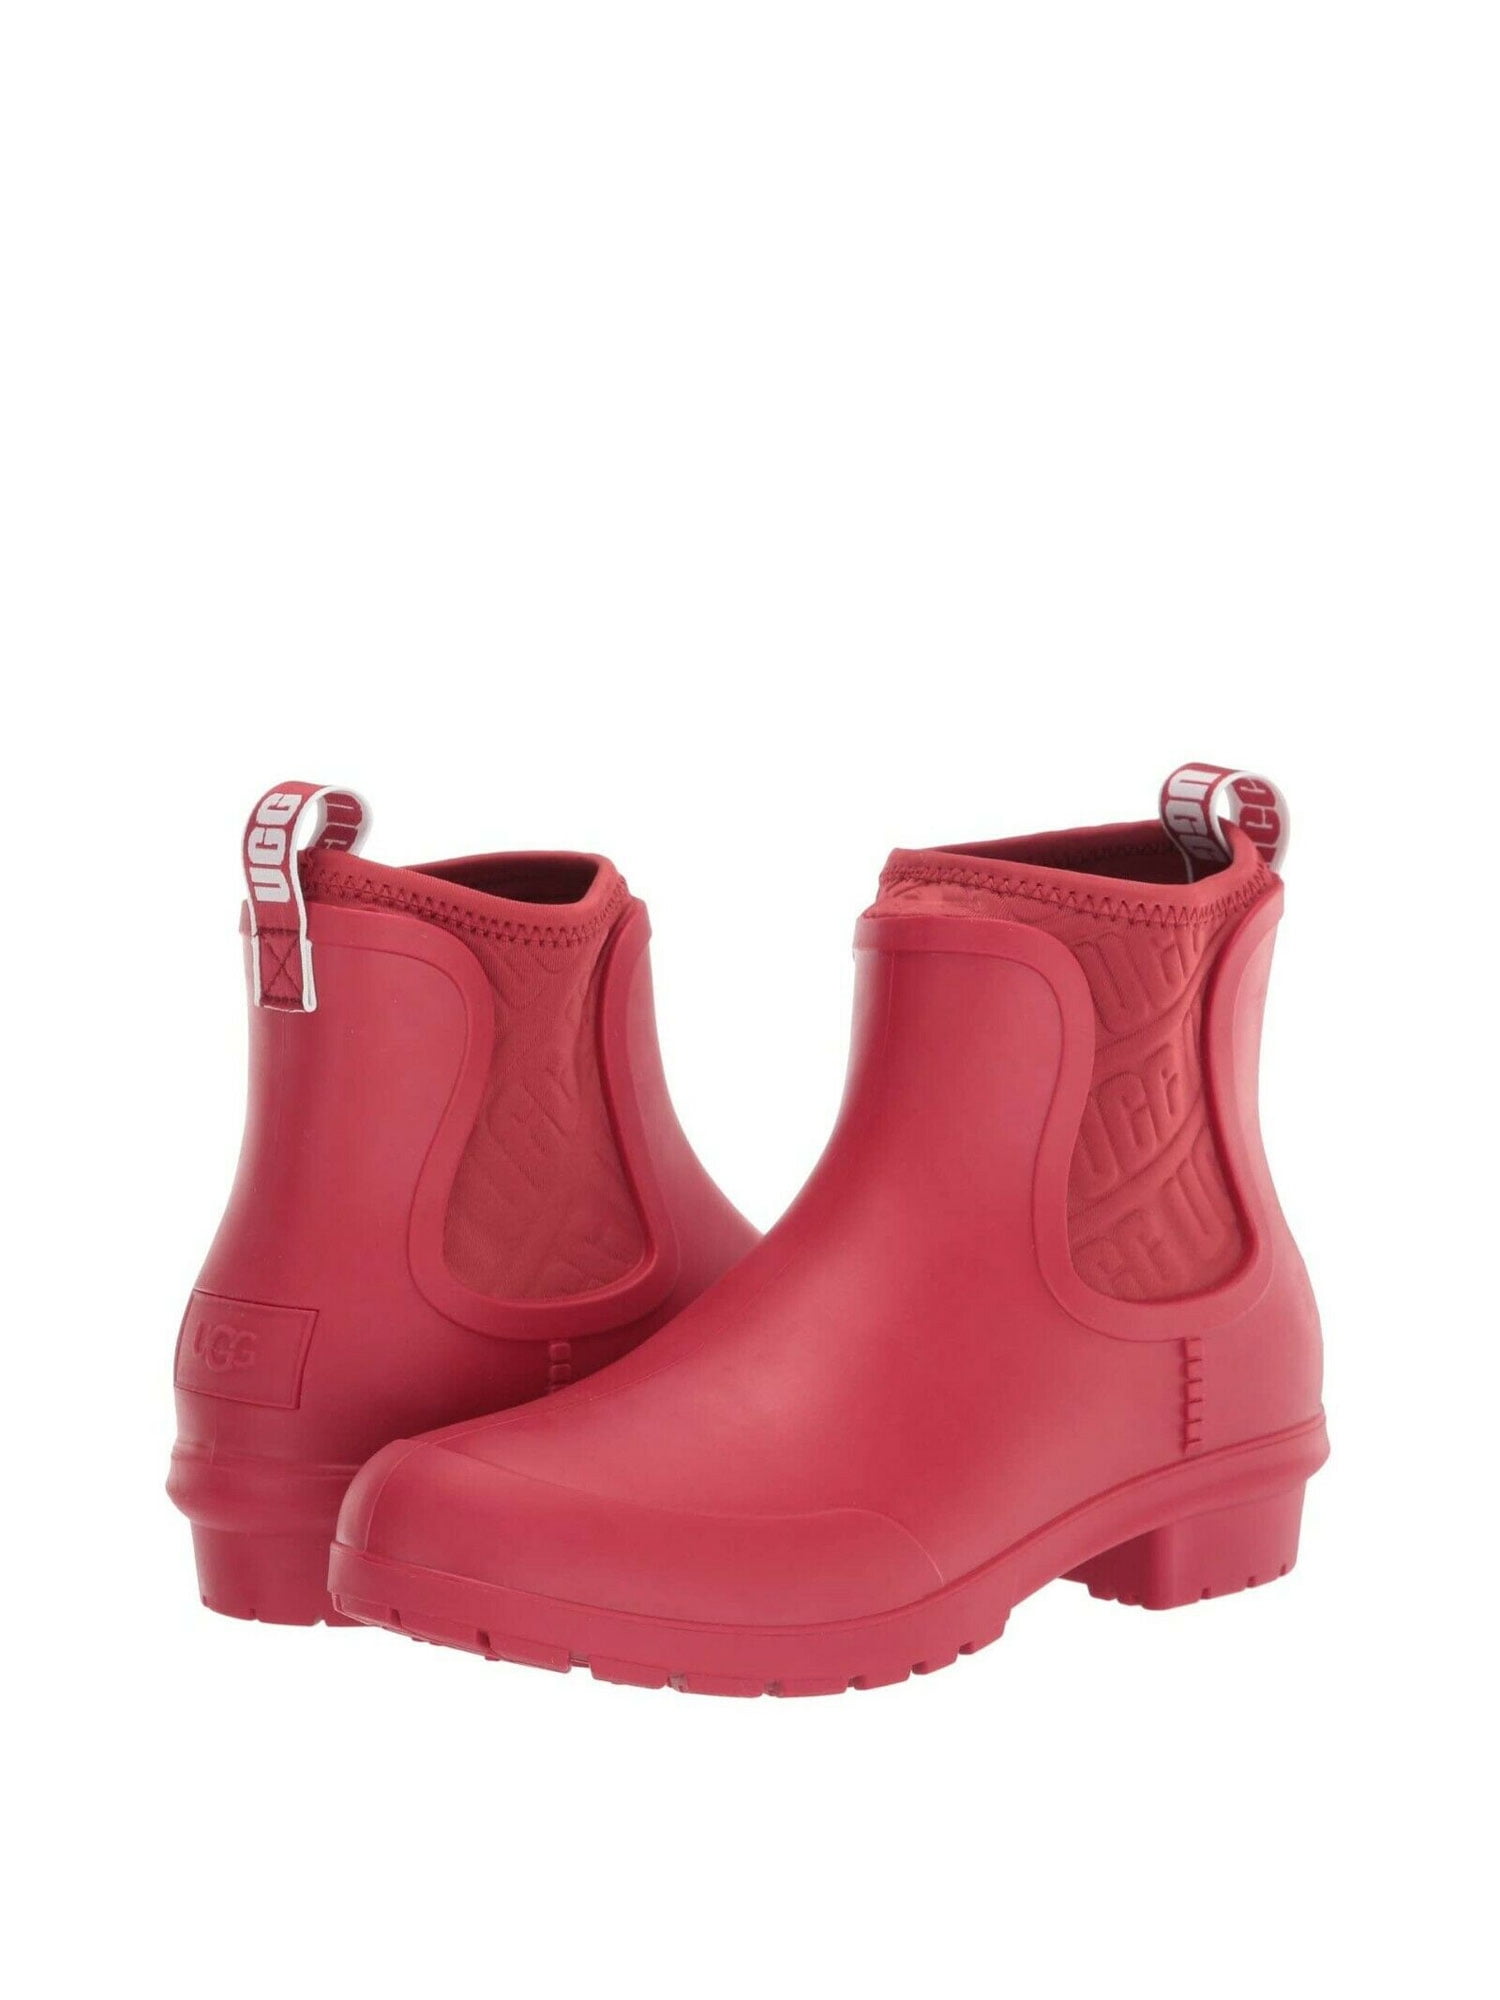 ugg ankle rain boots